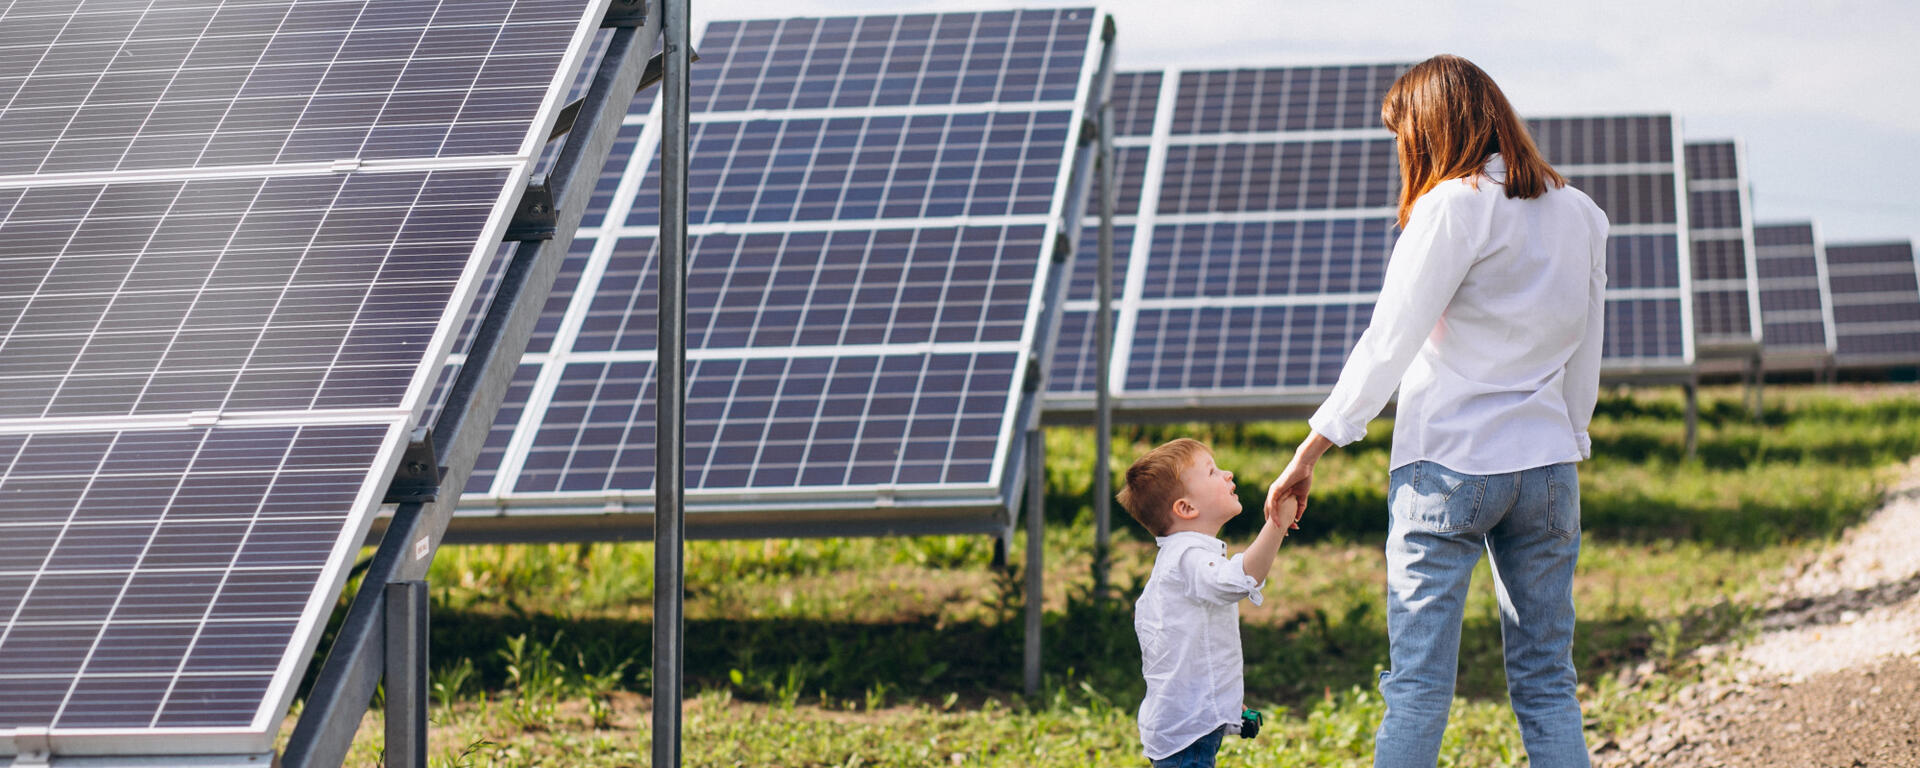 Monther child and solar panels